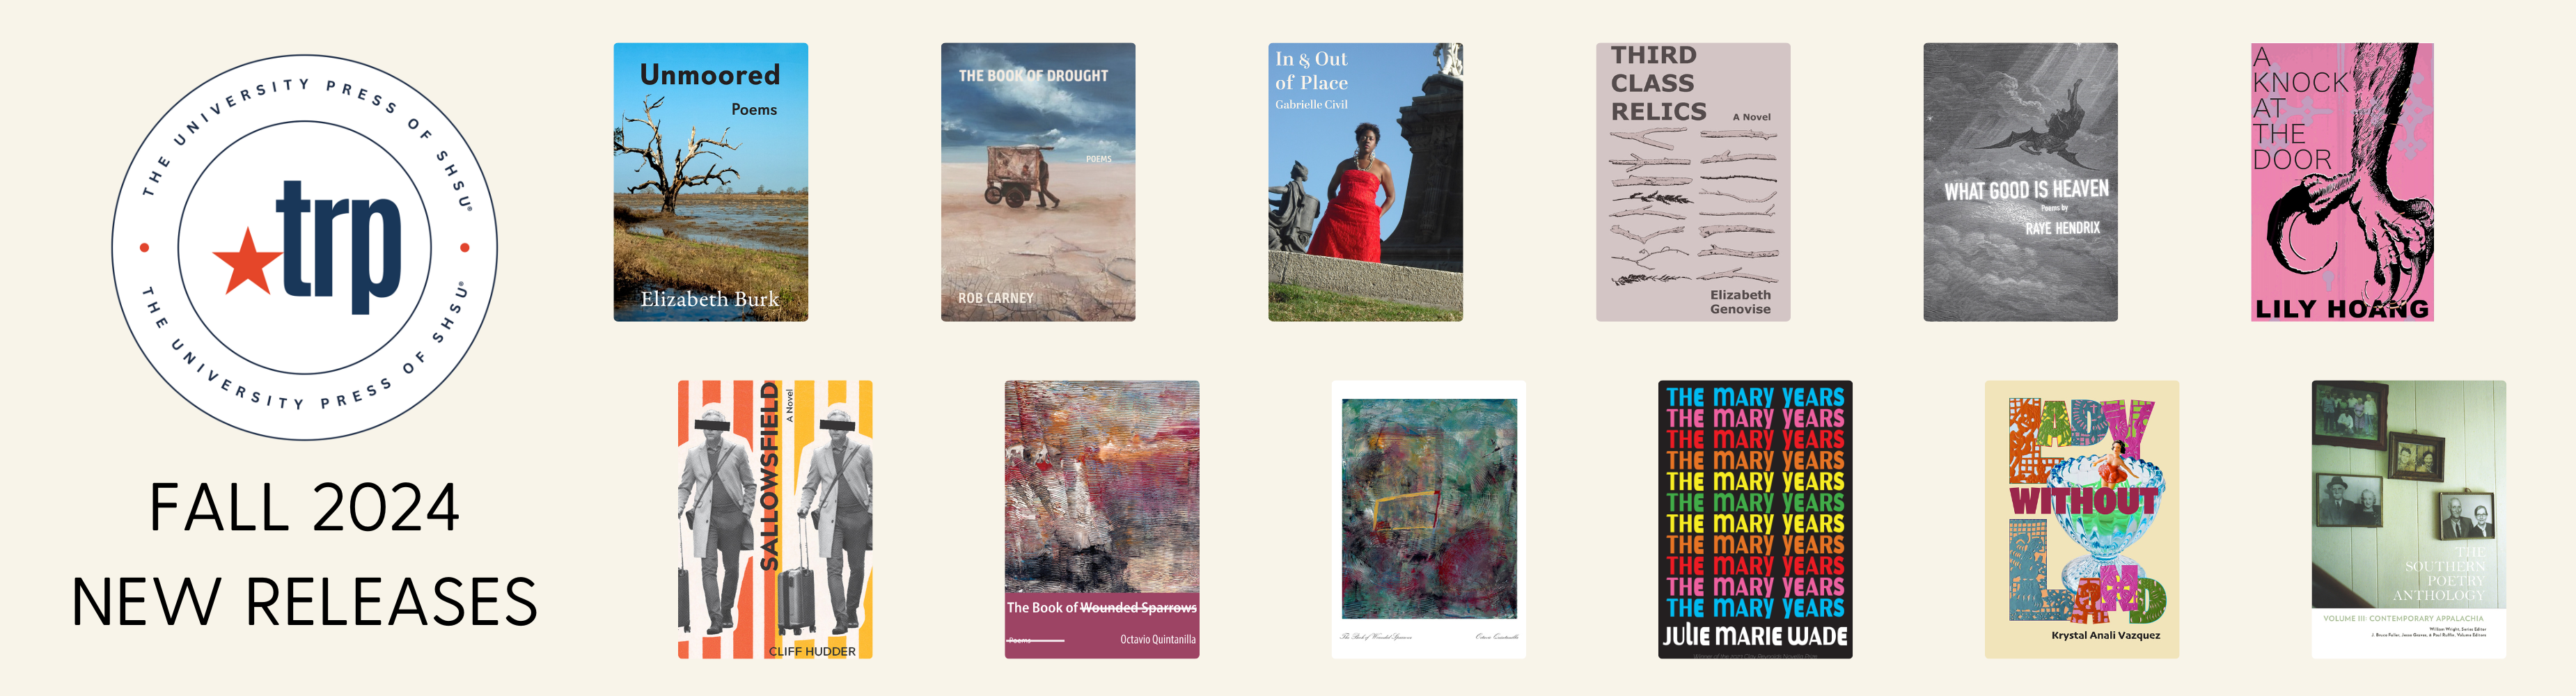 TRP Fall 2024 New Releases: Unmoored, by Elizabeth Burk; The Book of Drought, by Rob Carney; In and Out of Place, by Gabrielle Civil; Third Class Relics, by Elizabeth Genovise; What Good is Heaven, by Raye Hendrix; A Knock at the Door, by Lily Hoang; Sallowsfield, by Cliff Hudder; The Book of Wounded Sparrows, by Octavio Quintanilla; Lady Without Land, by Krystal Anali Vazquez; The Mary Years, by Julie Marie Wade; The Southern Poetry Anthology Volume 3 Contemporary Appalachia, edited by William Wright, J. Bruce Fuller, Jesse Graves, and Paul Ruffin